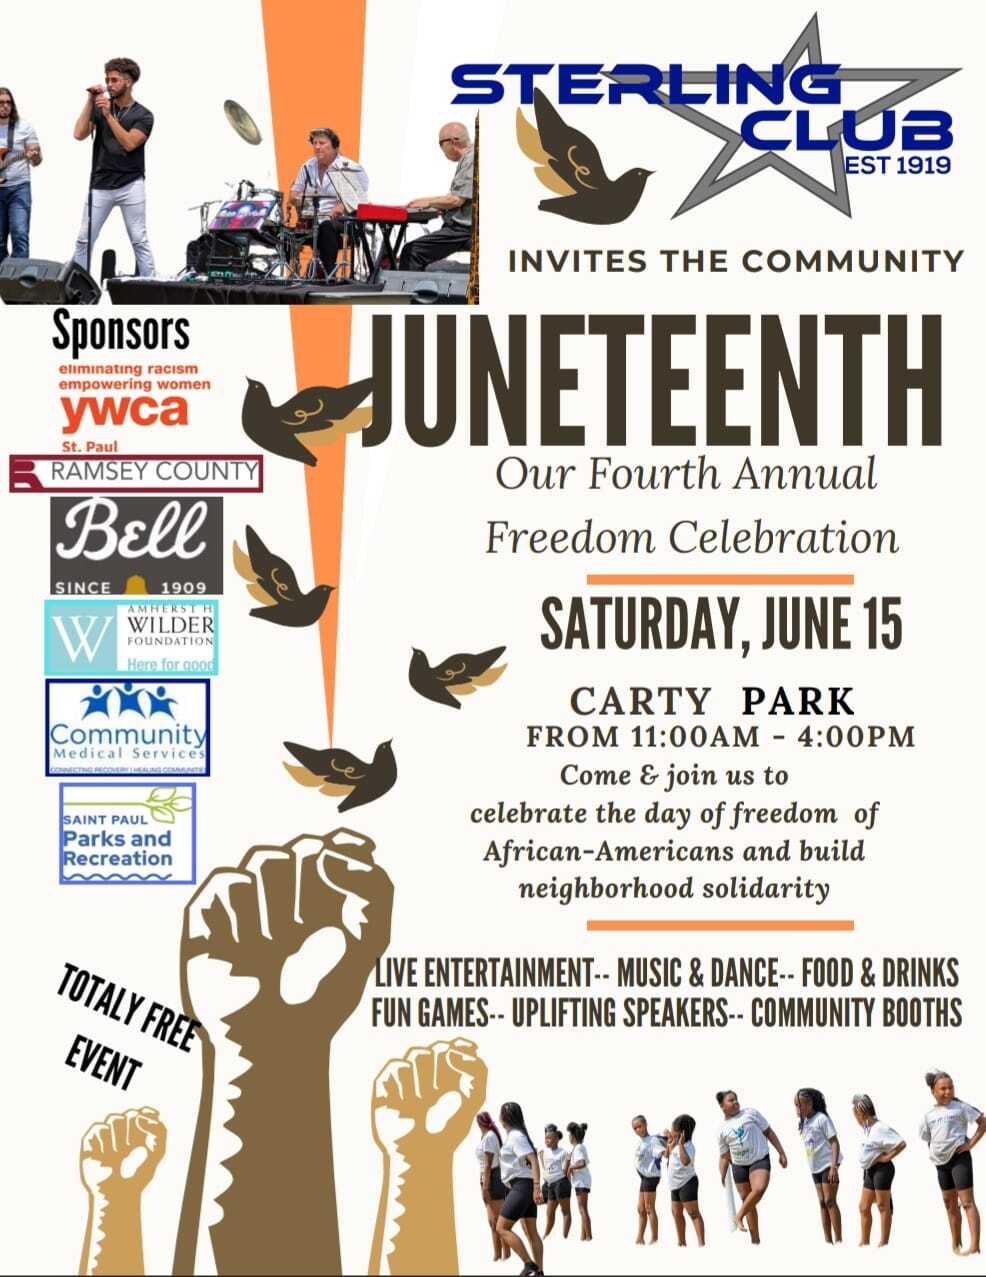 Sterling Club Juneteenth Event